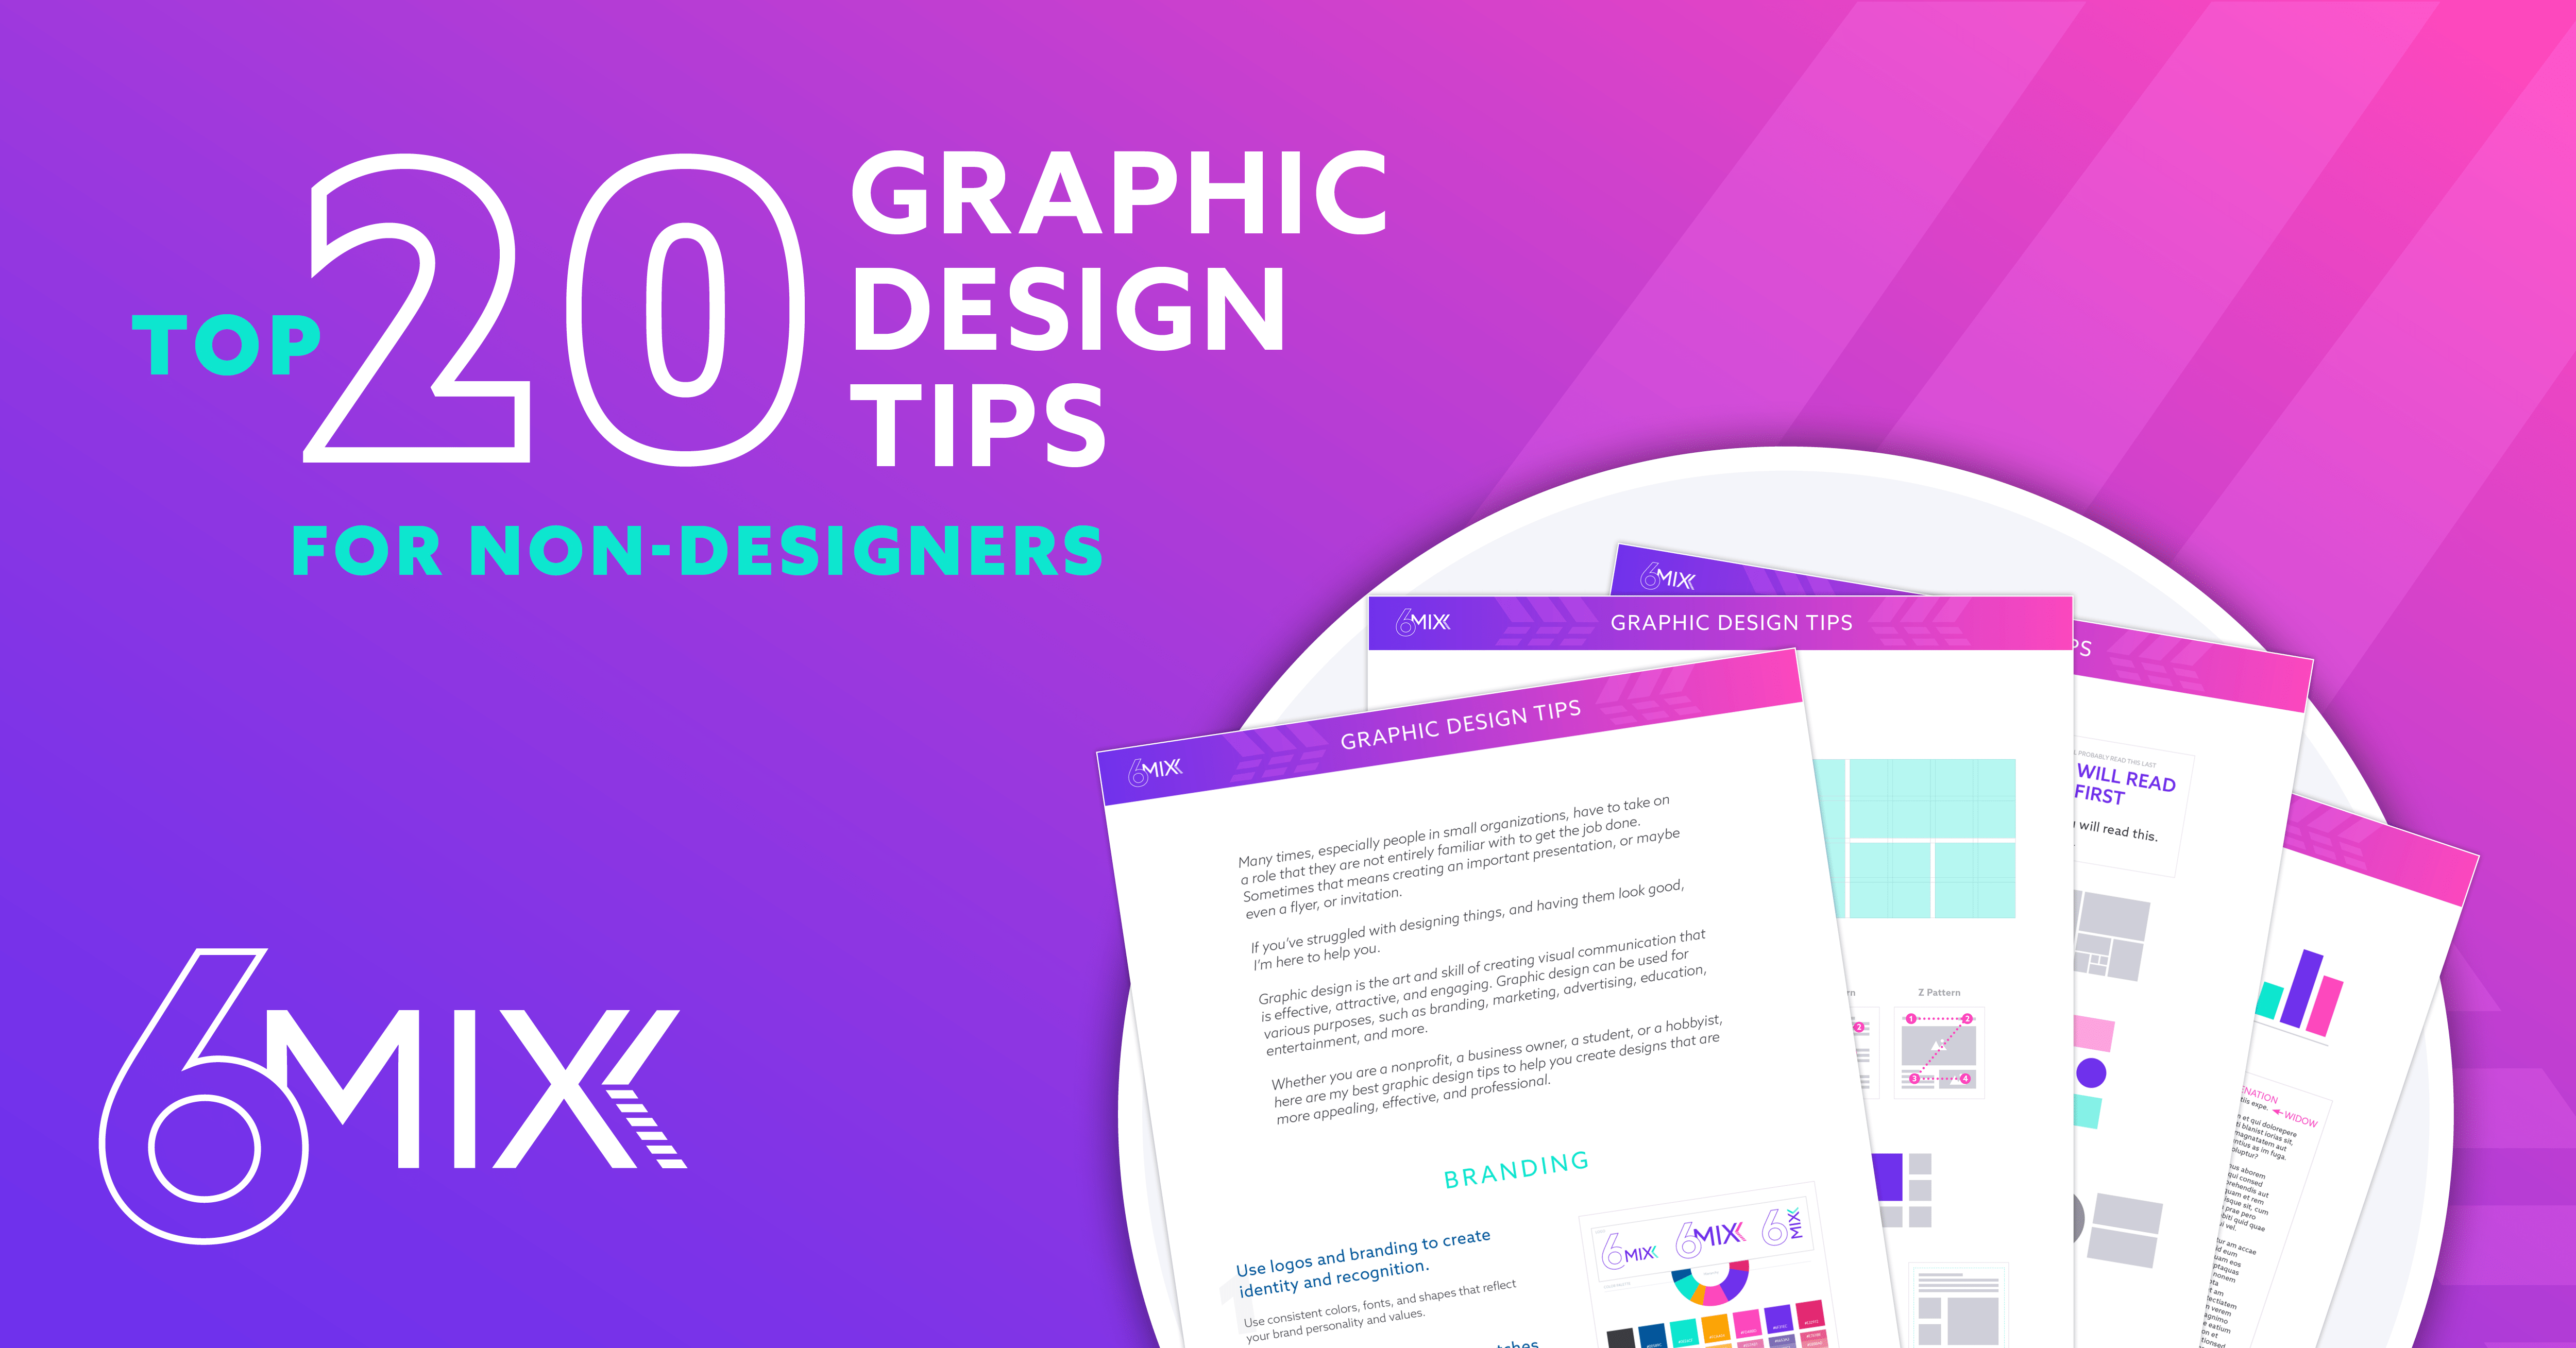 Top 20 graphic design tips for non-designers preview image by 6Mixx